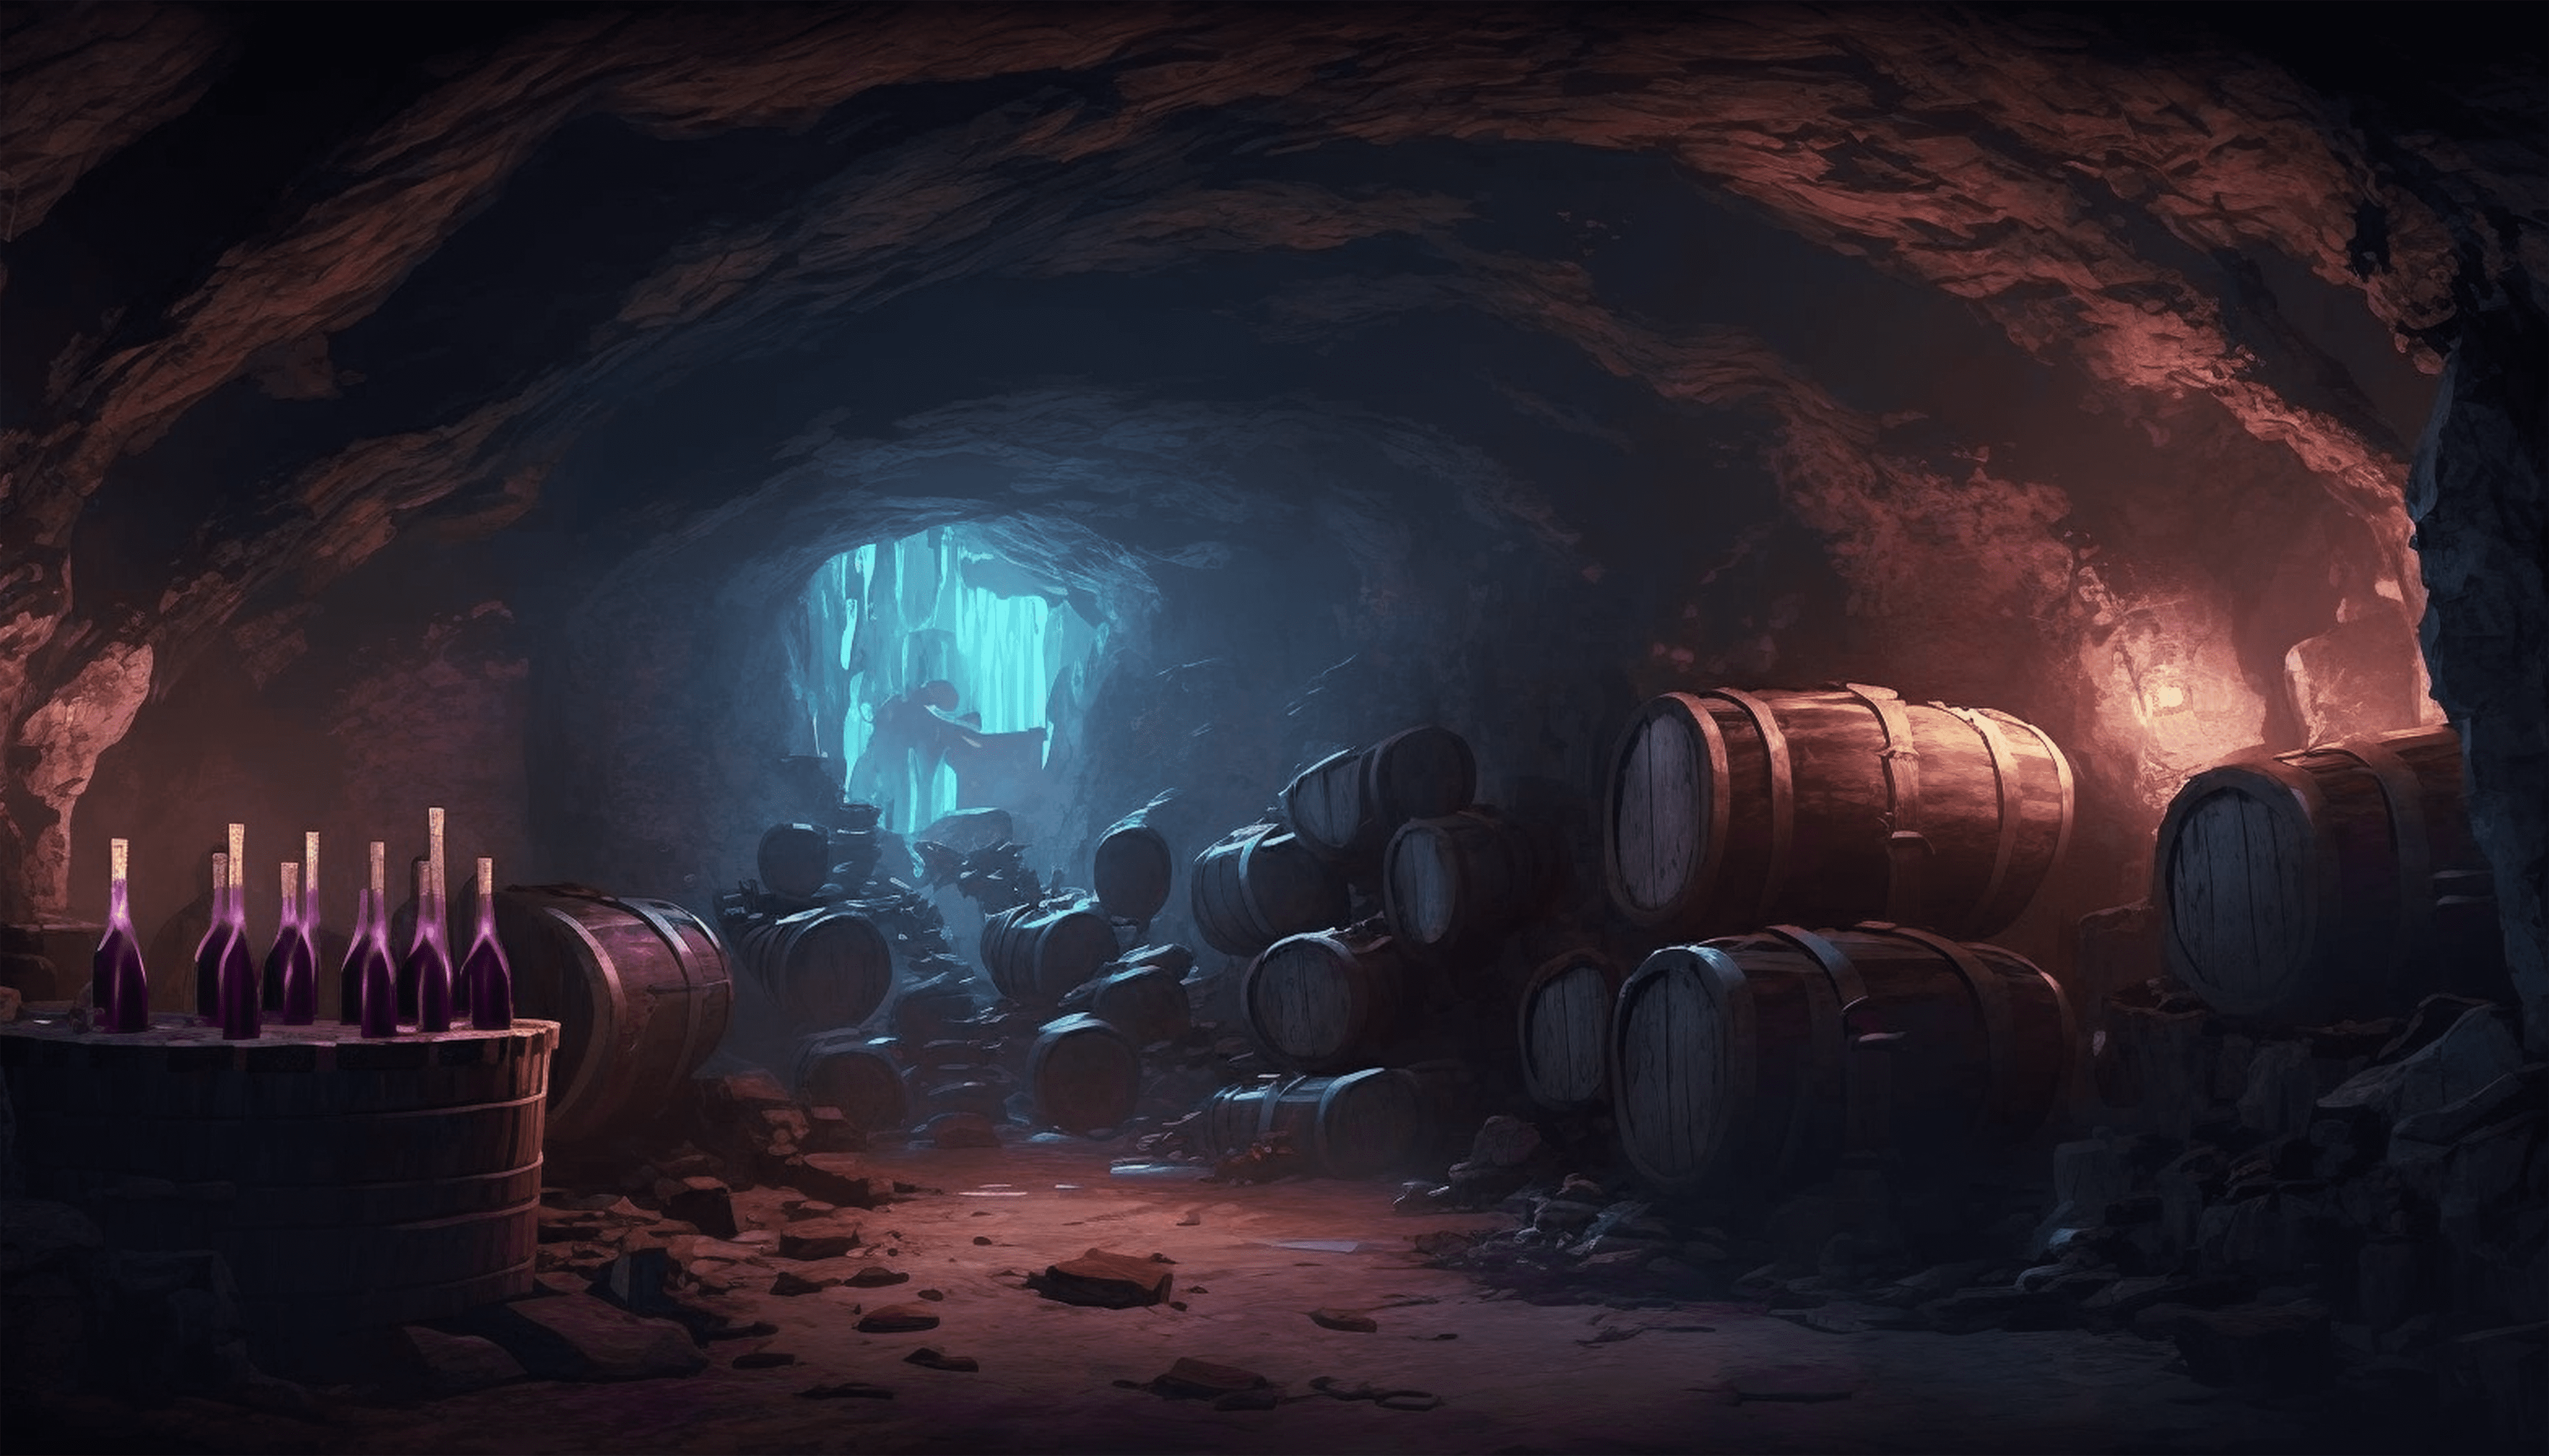 images/smmk_dark_natural_cave_with_many_wine_casks_high_fantasy_hyper__b3917bb9-3b6f-47cb-bea7-08392a971e1f-0000-1024x585.png